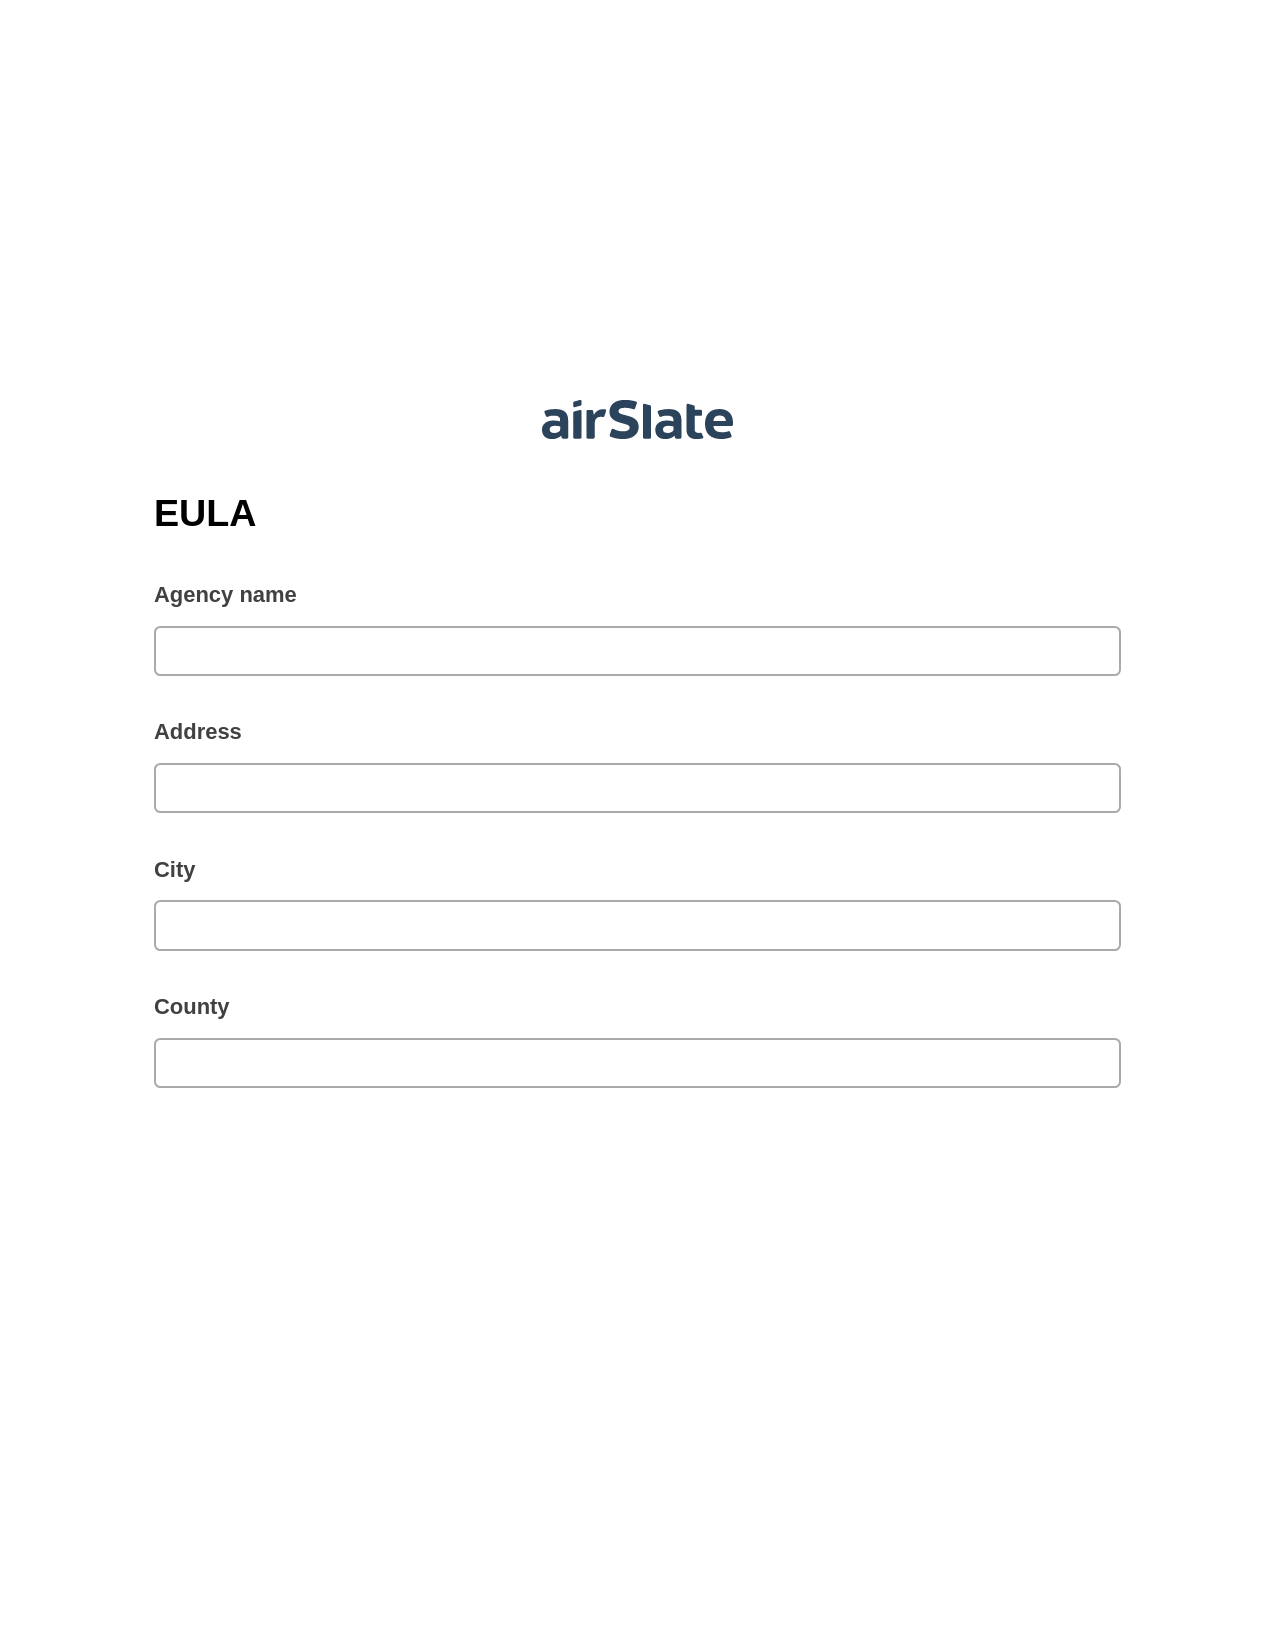 EULA Pre-fill Slate from MS Dynamics 365 Records Bot, Reminder Bot, Export to MySQL Bot